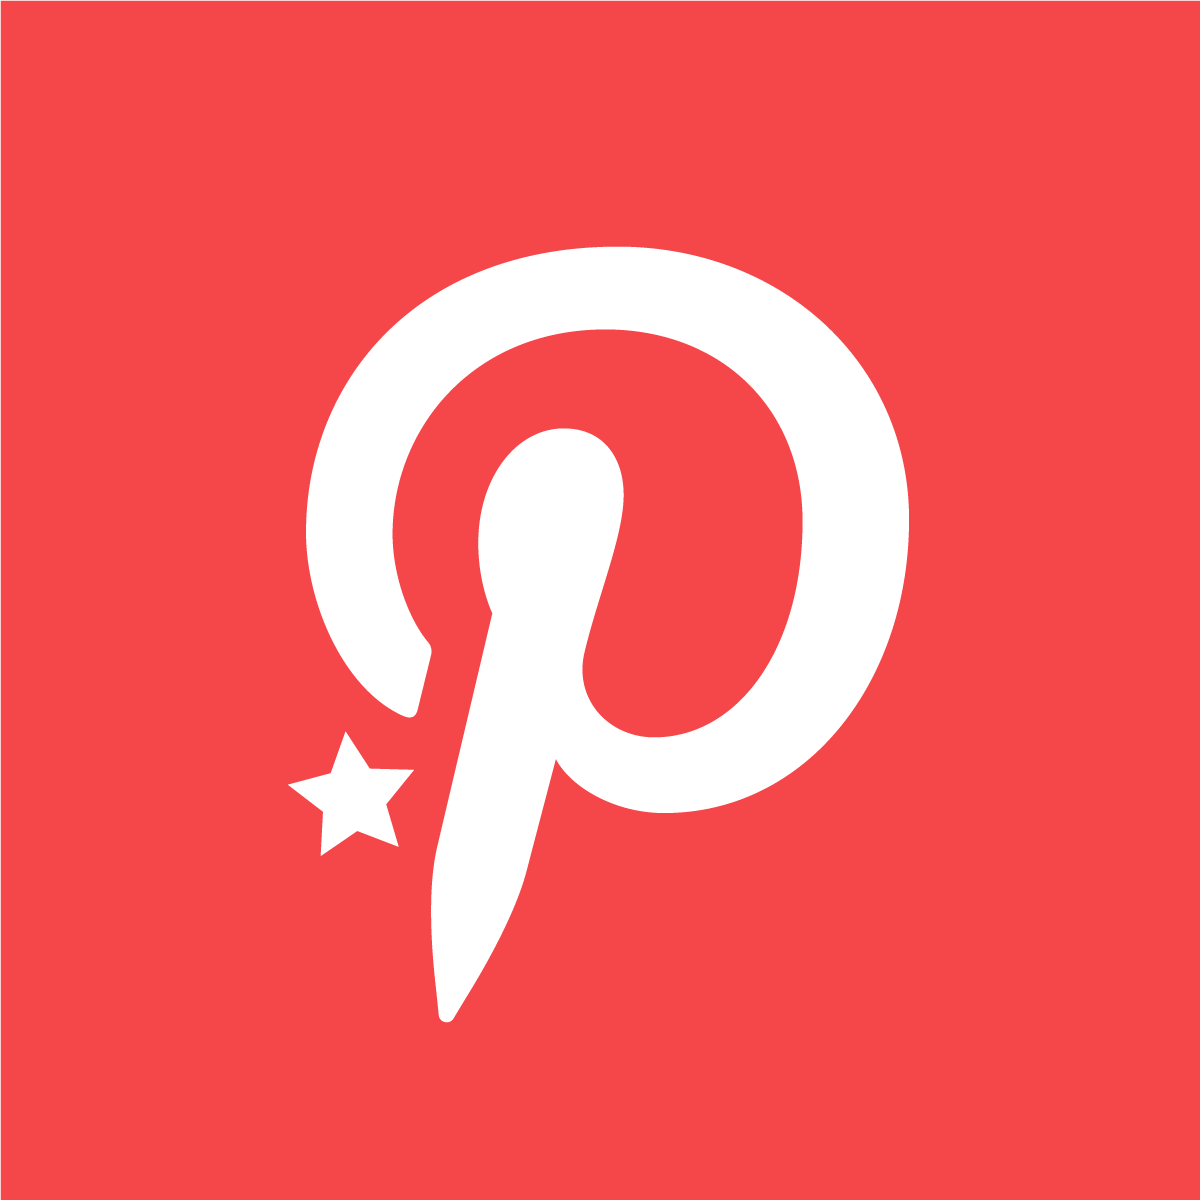 Hire Shopify Experts to integrate Pinterest Pixel / Tag install app into a Shopify store